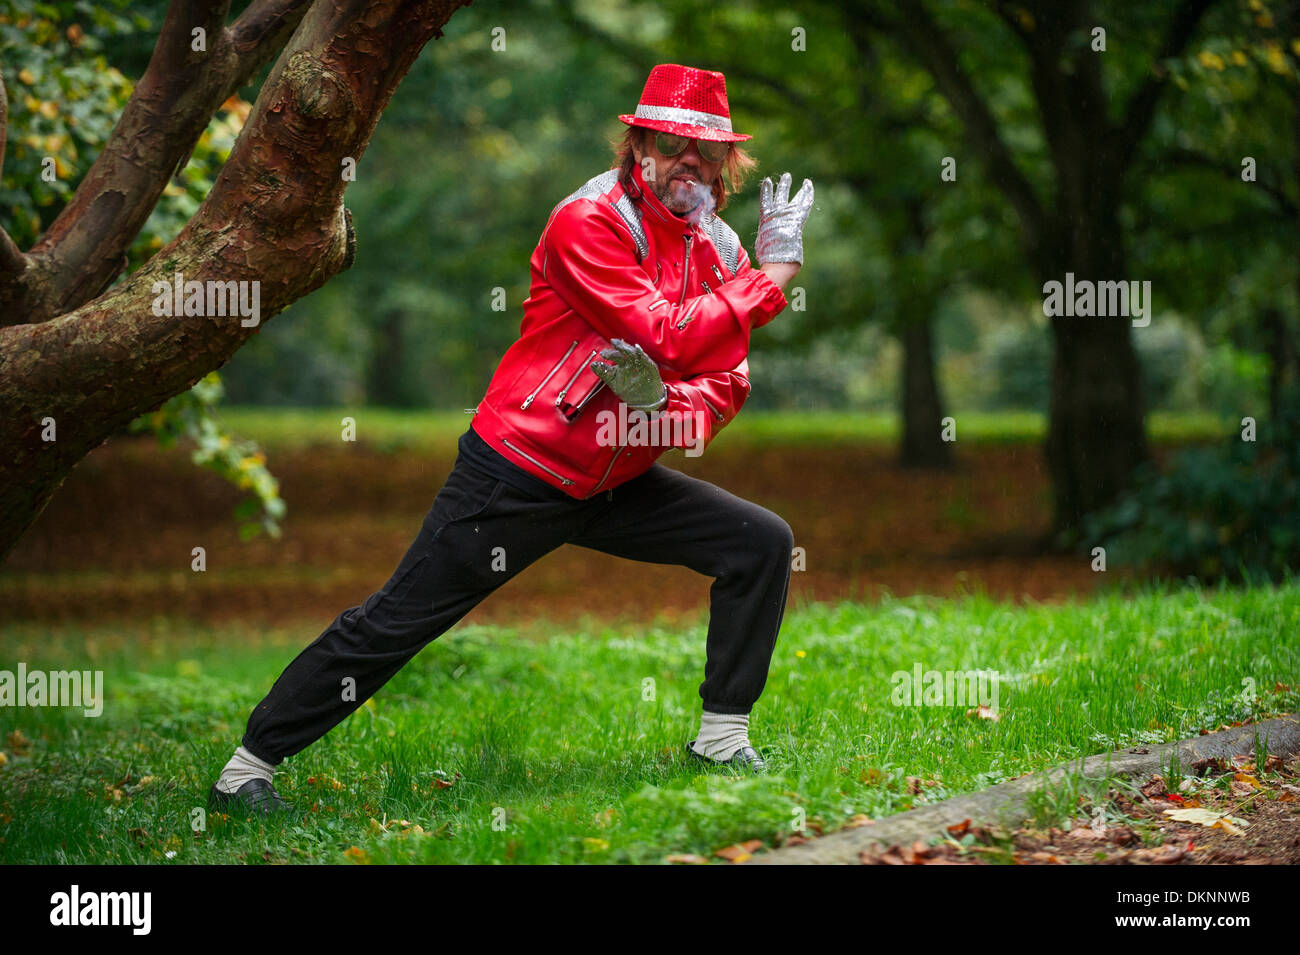 A Michael Jackson impersonator posing for a photo in Bute Park, Cardiff, while smoking a cigarette Stock Photo